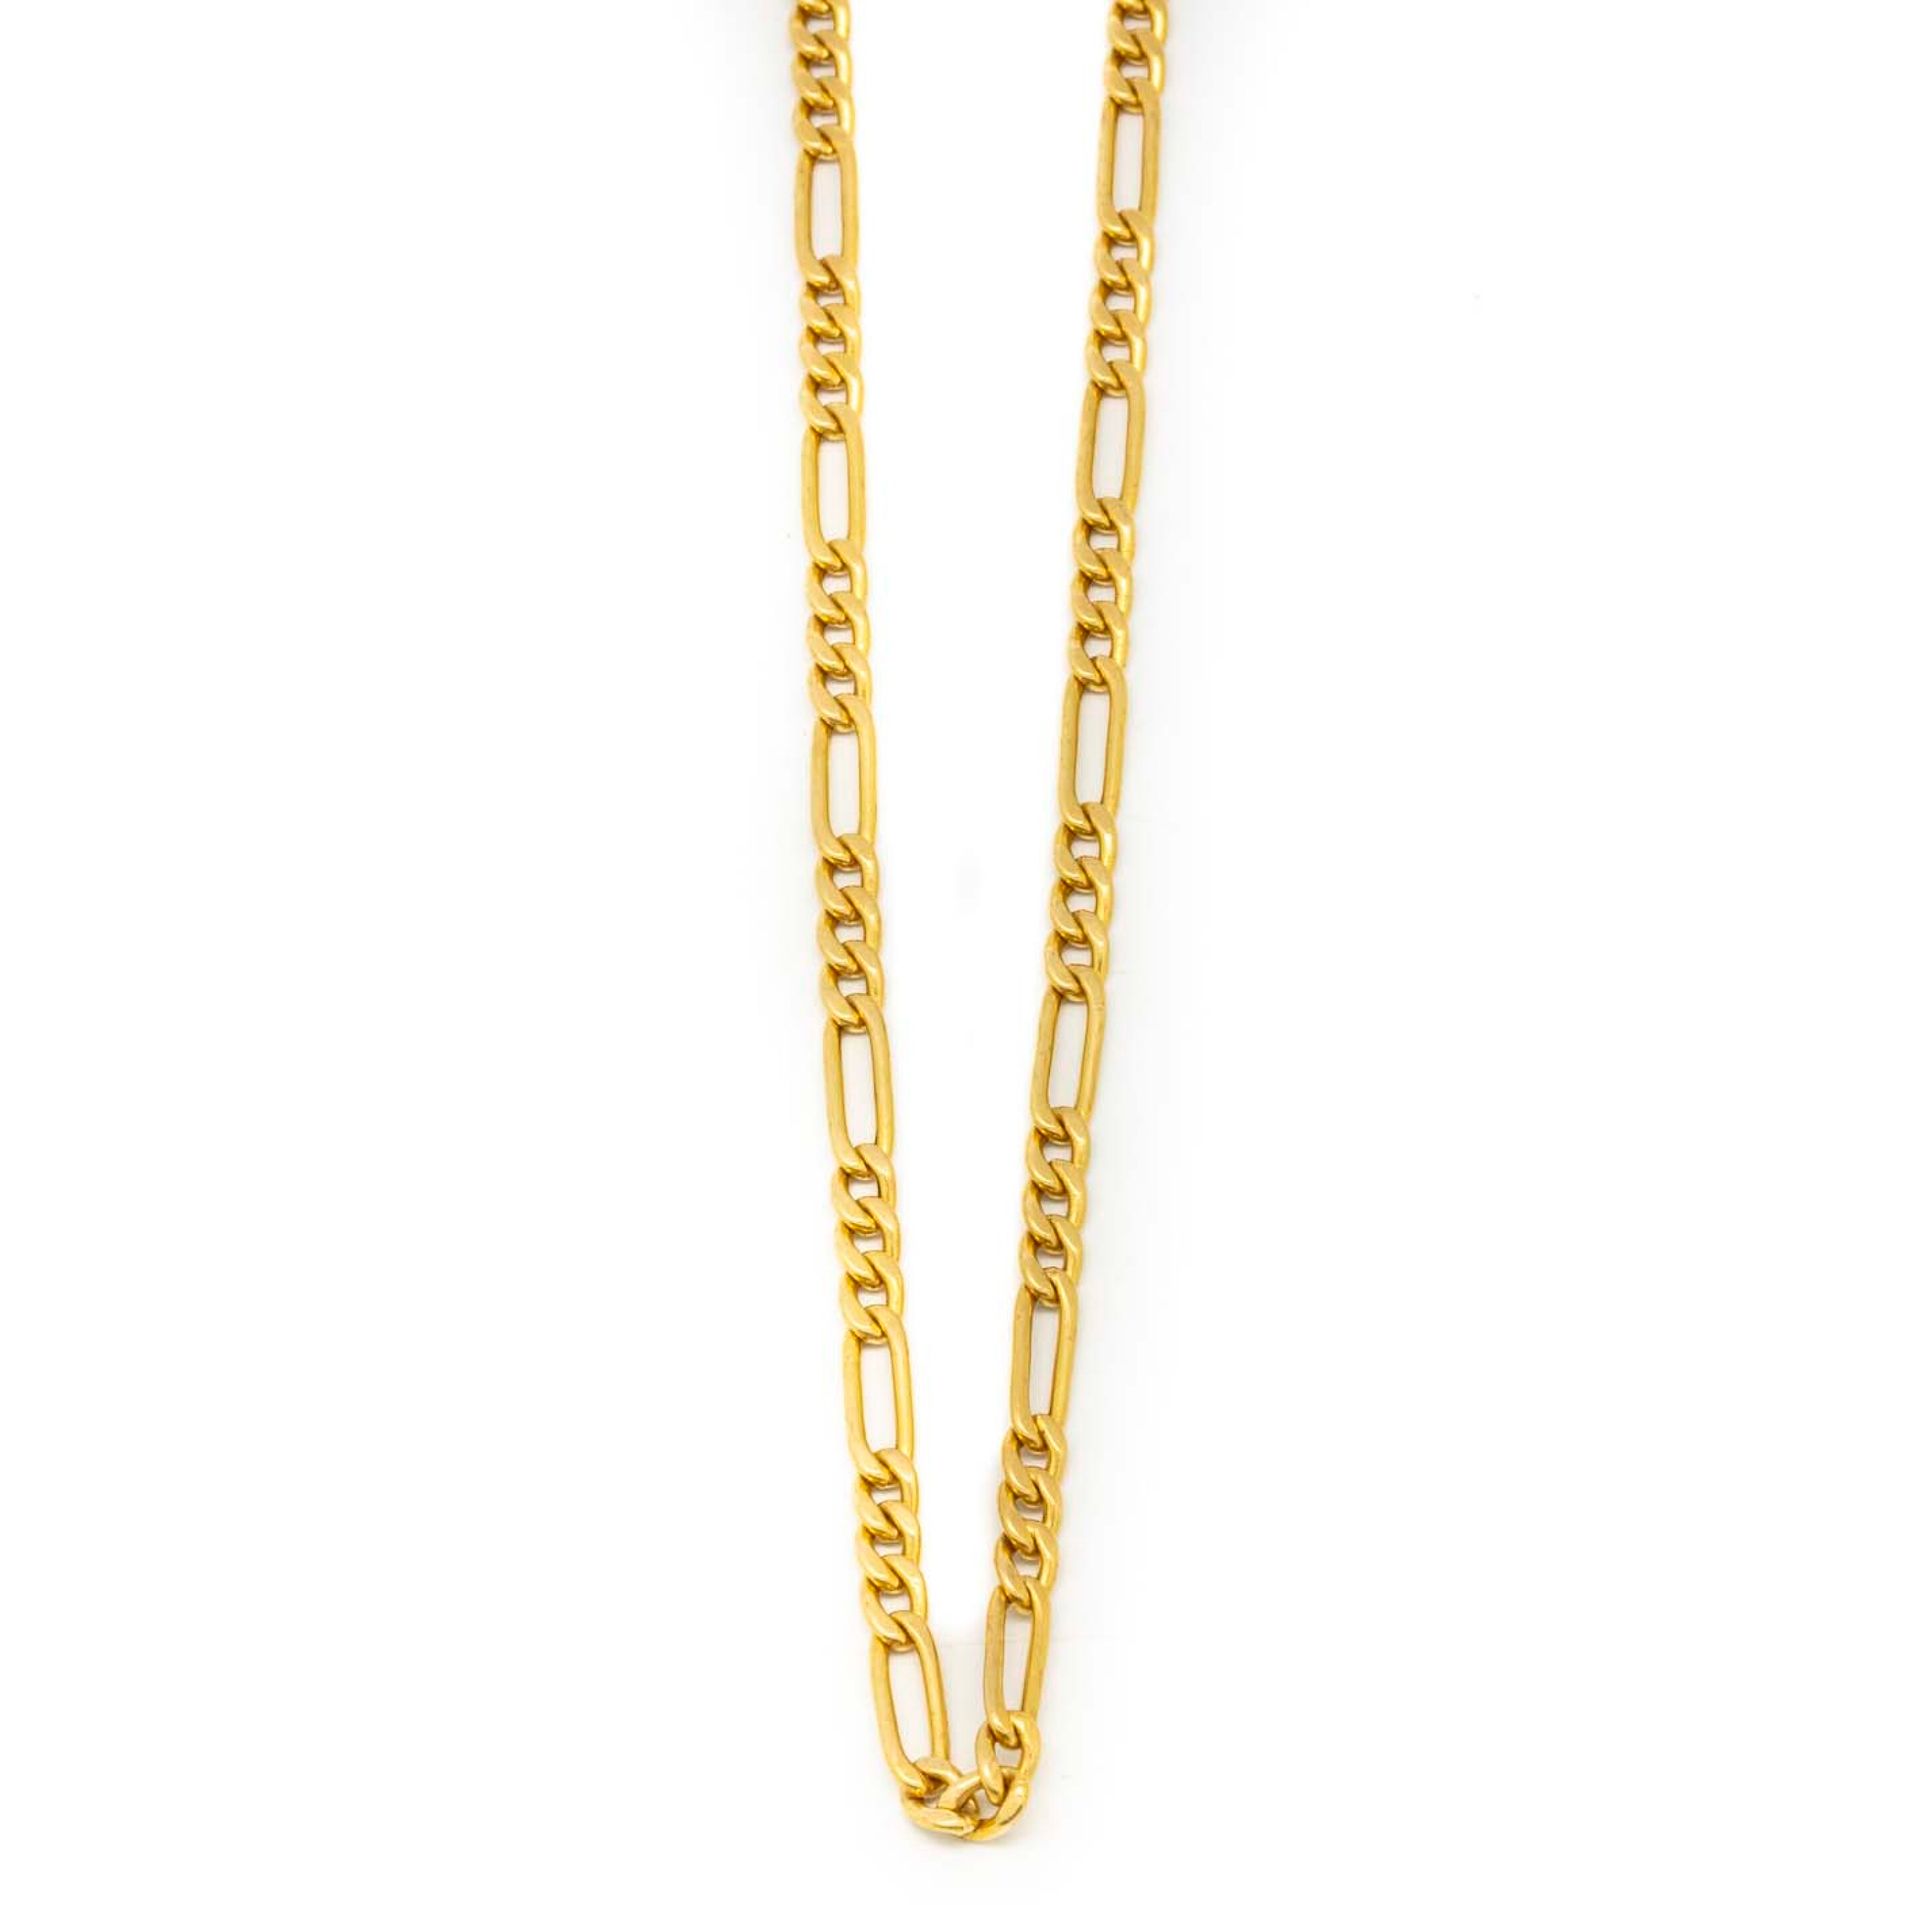 Null Yellow gold chain with flat links

Weight : 14,3 g.